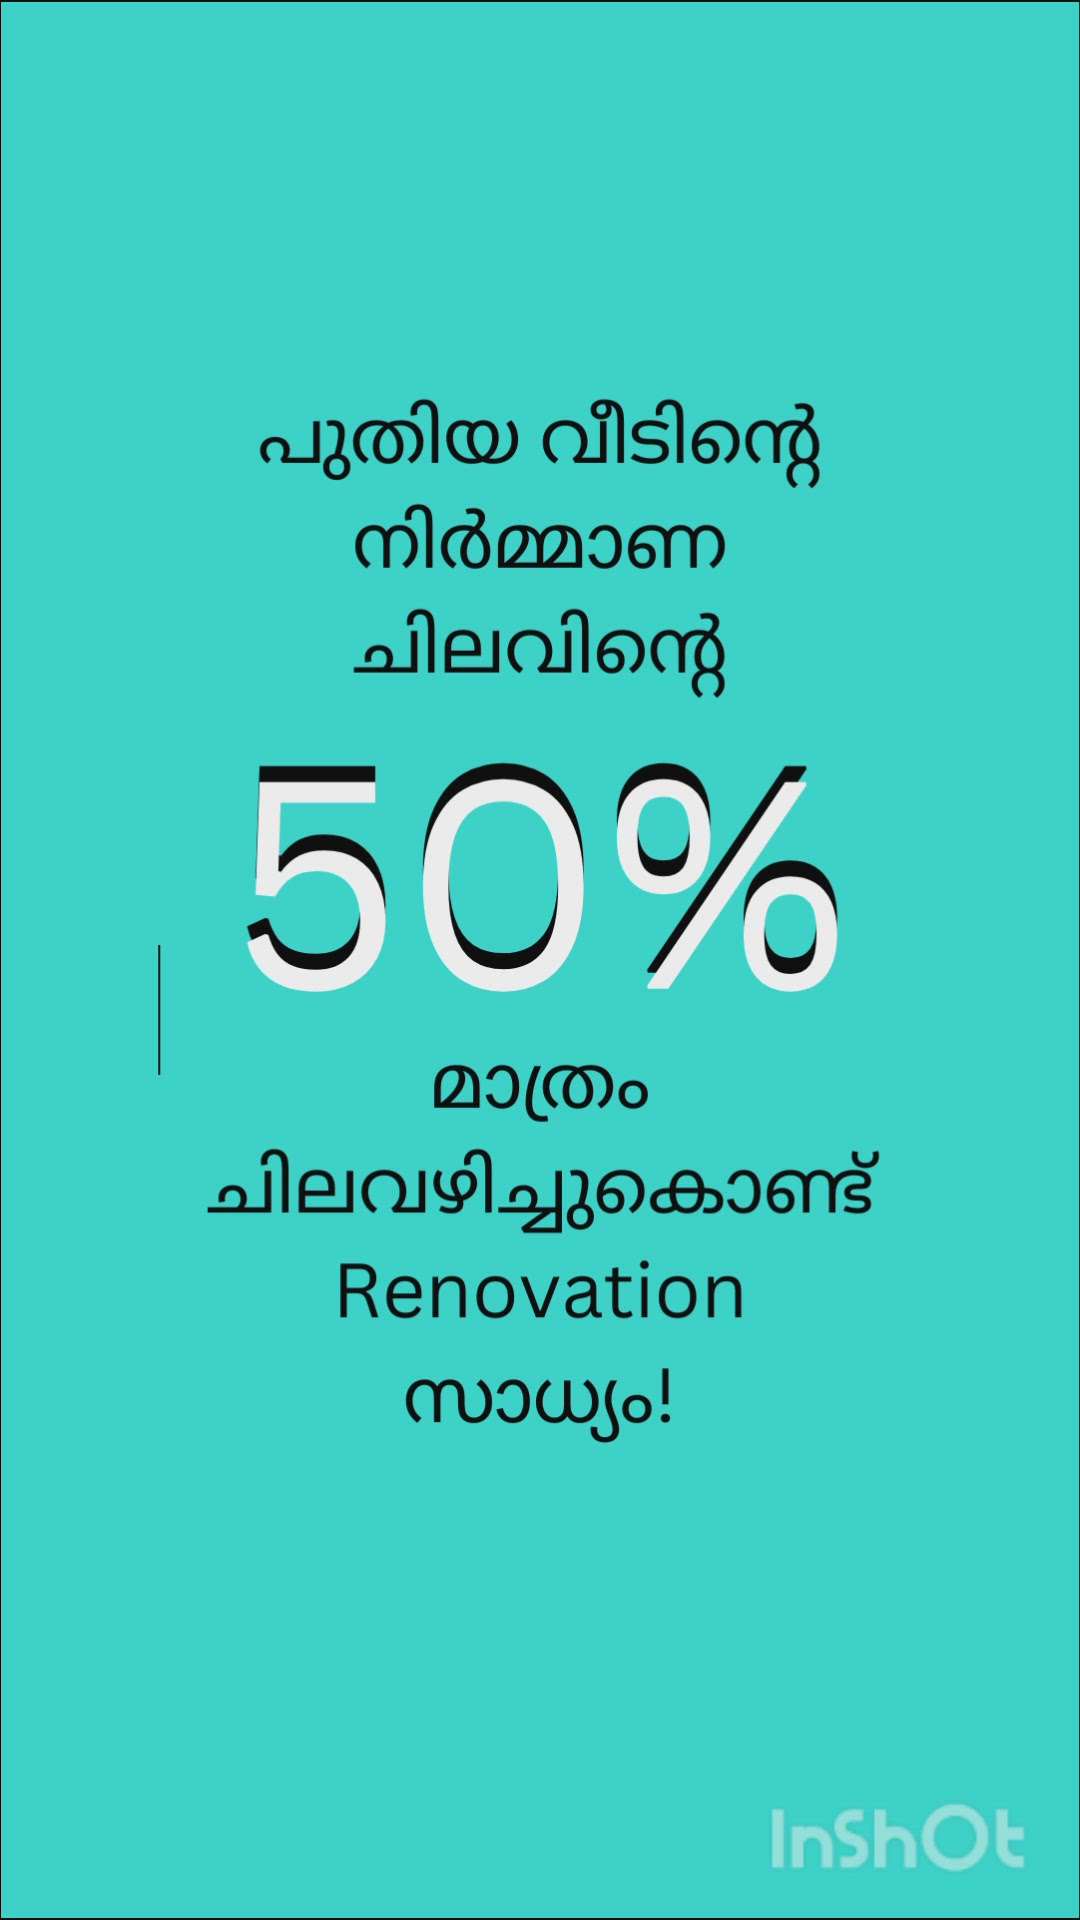 Undertaking all kinds of renovation works in reasonable budget in the city. 

For more details
☎️ 0487 2972999
🌐 www.skyoryx.com

#skyoryx #builders #buildersinthrissur #house #plan #civil #construction #estimate #plan #elevationdesign #renovation #newhome #modernhome